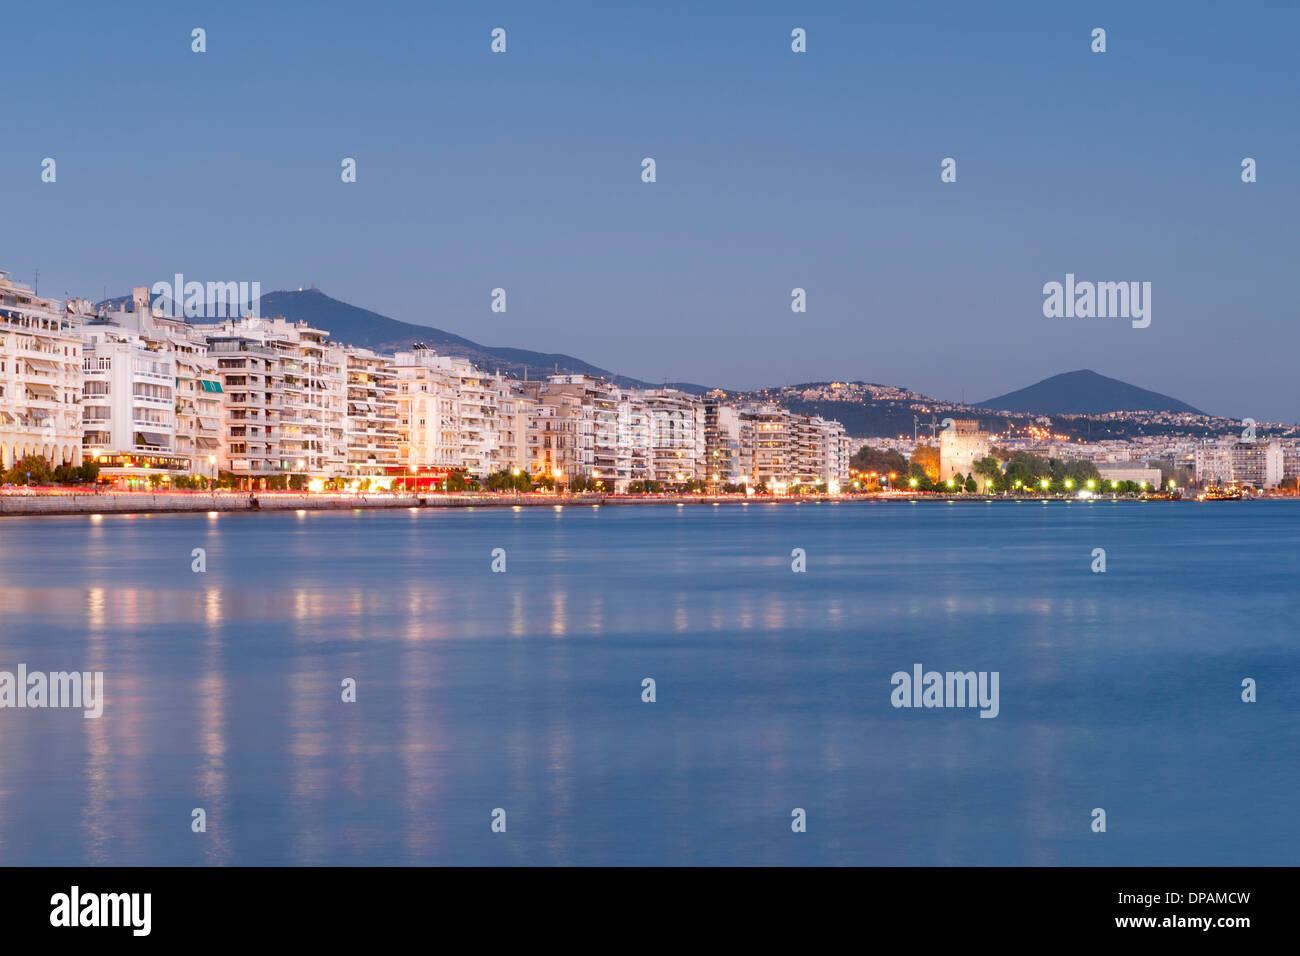 Dusk view of the waterfront and buildings on Nikis Avenue in Thessaloniki, Greece. Stock Photo